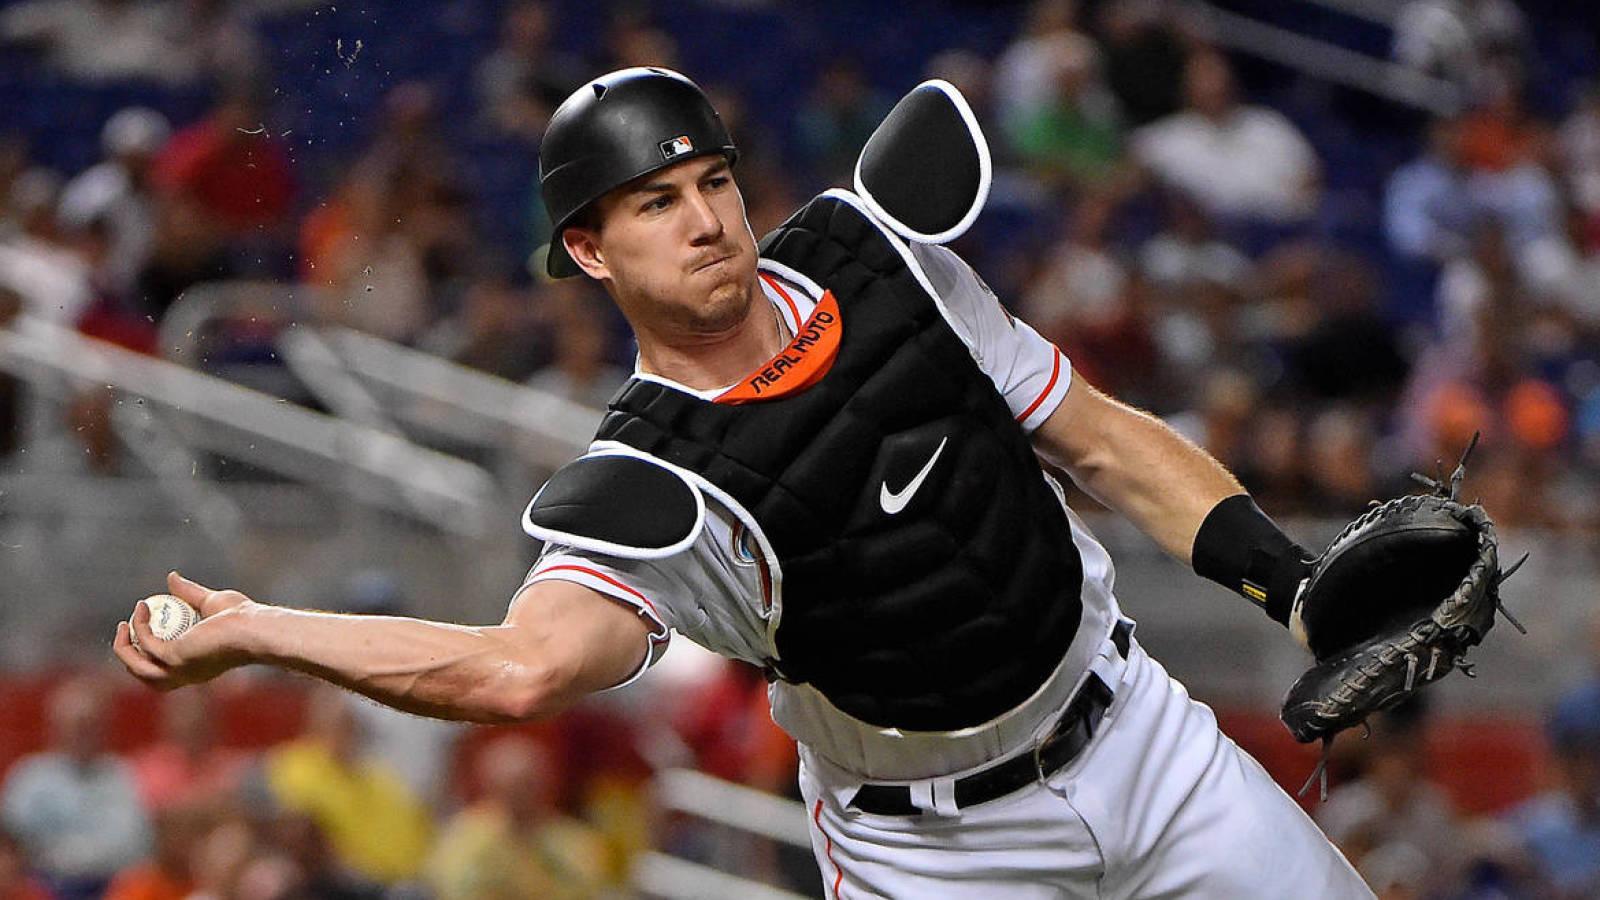 J.T. Realmuto Wallpapers - Wallpaper Cave